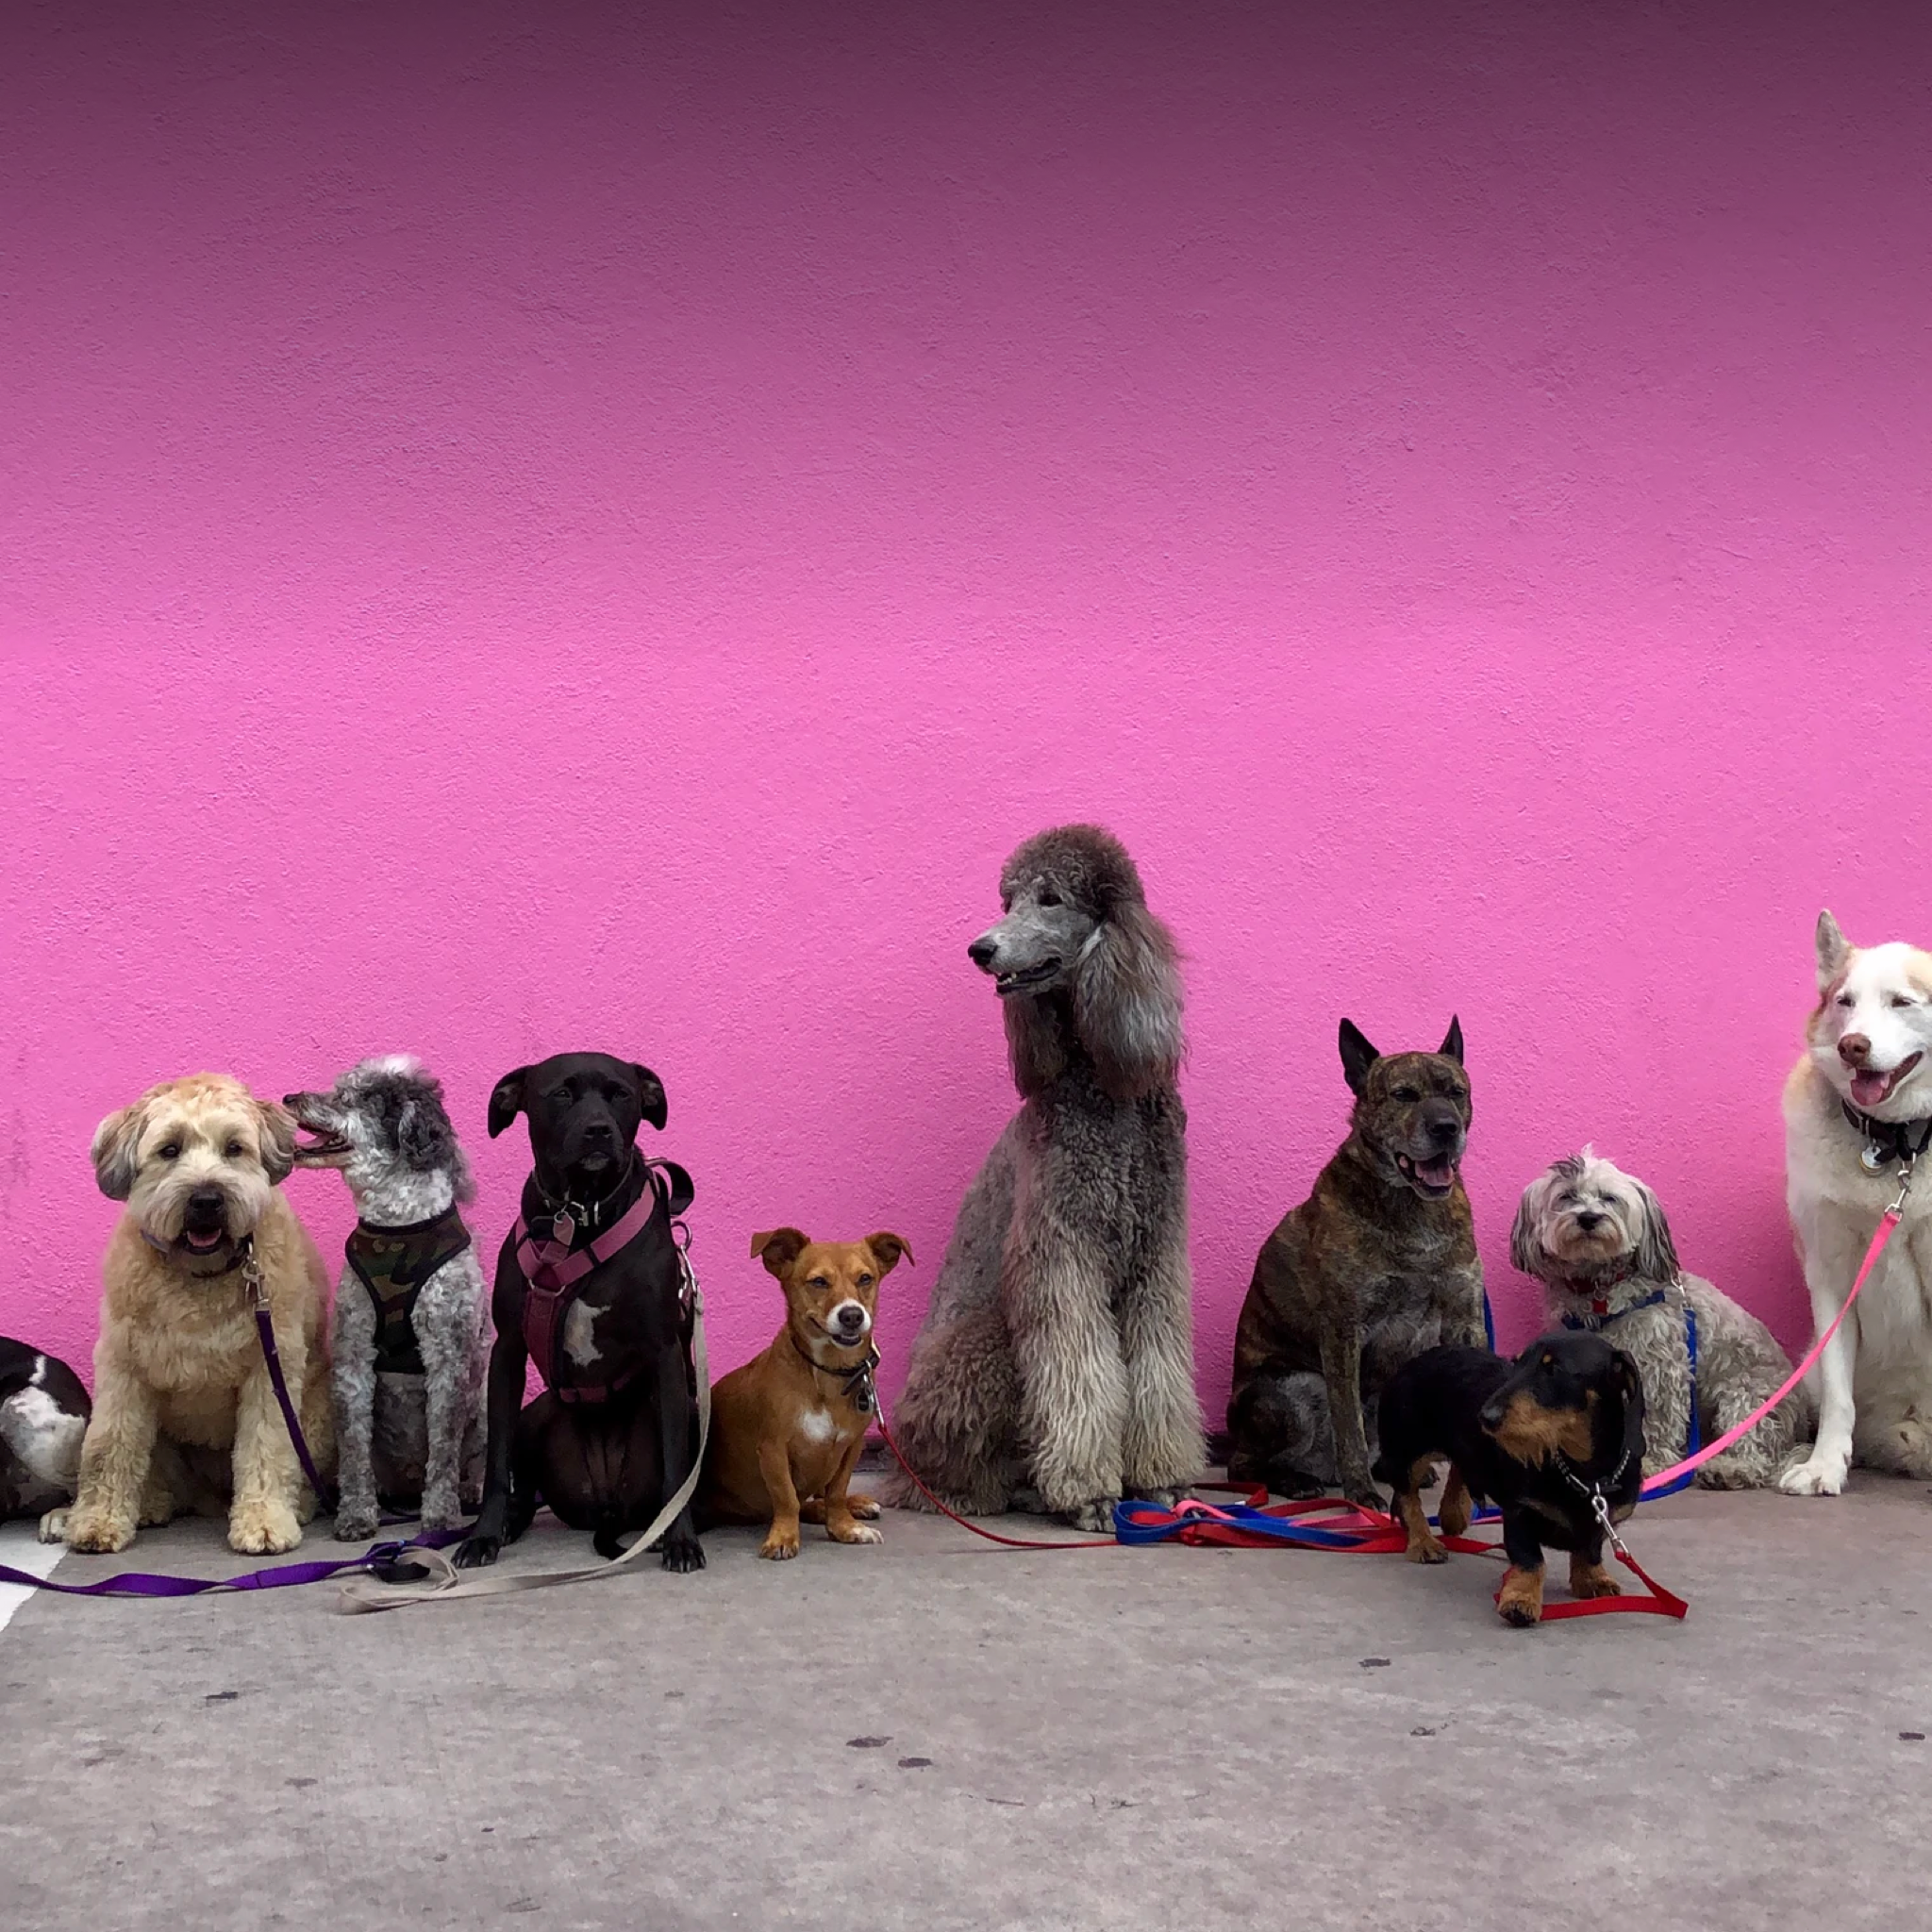 Dogs of all breeds and sizes lined up against a wall